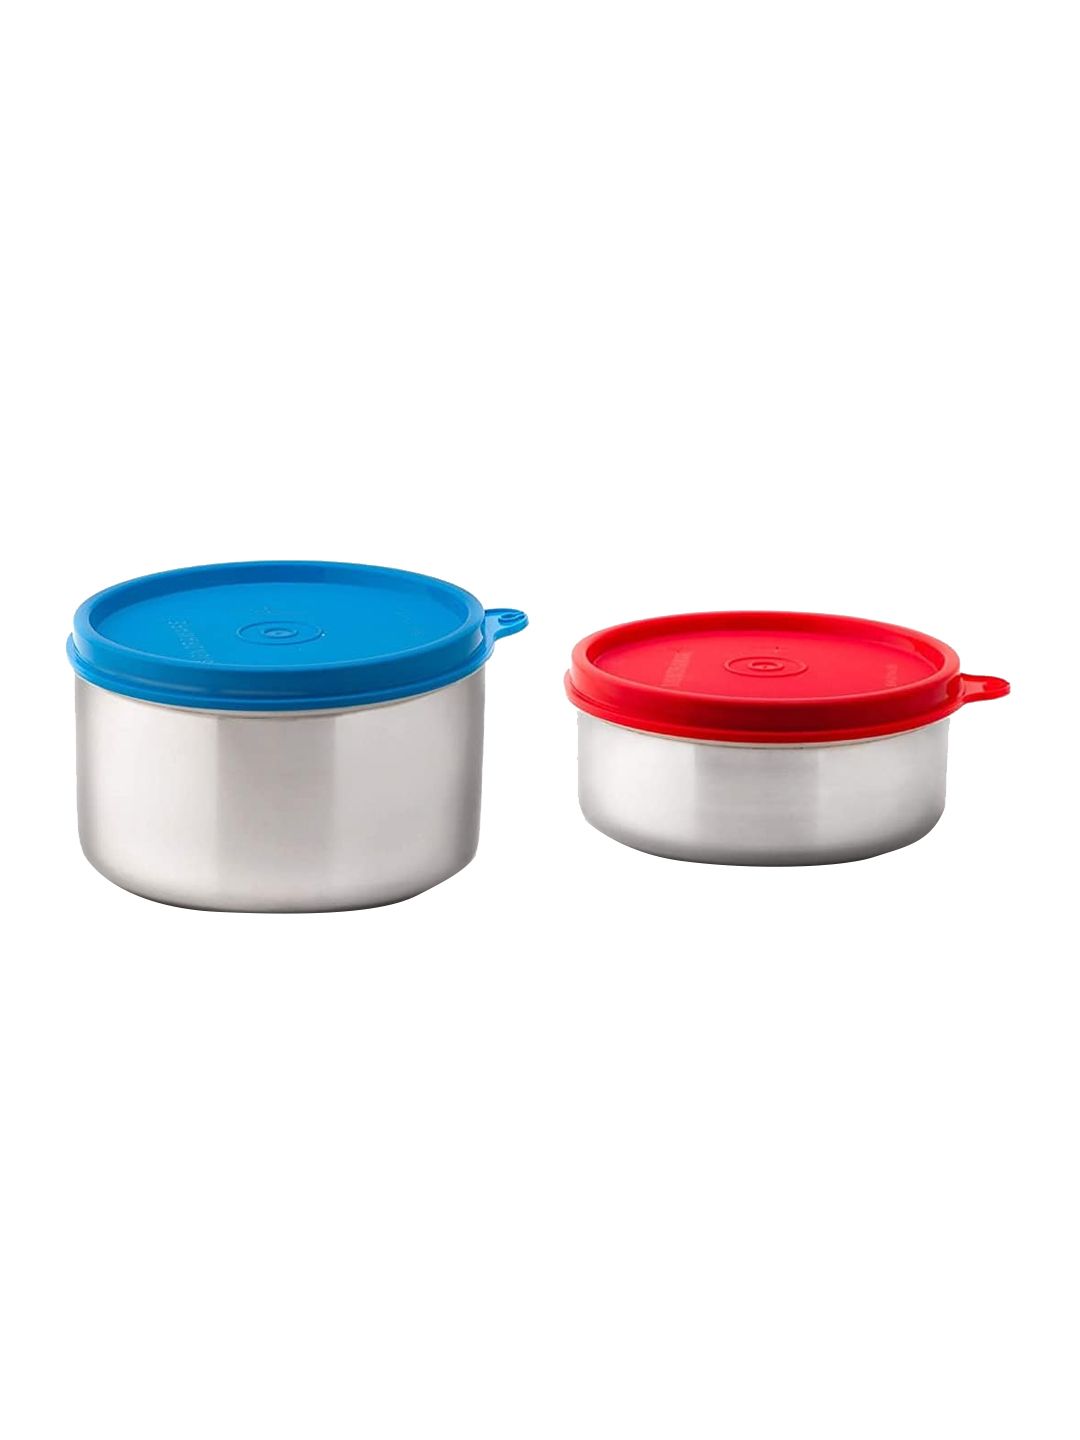 SignoraWare Set of 2 Solid Stainless Steel Storage Jars Price in India